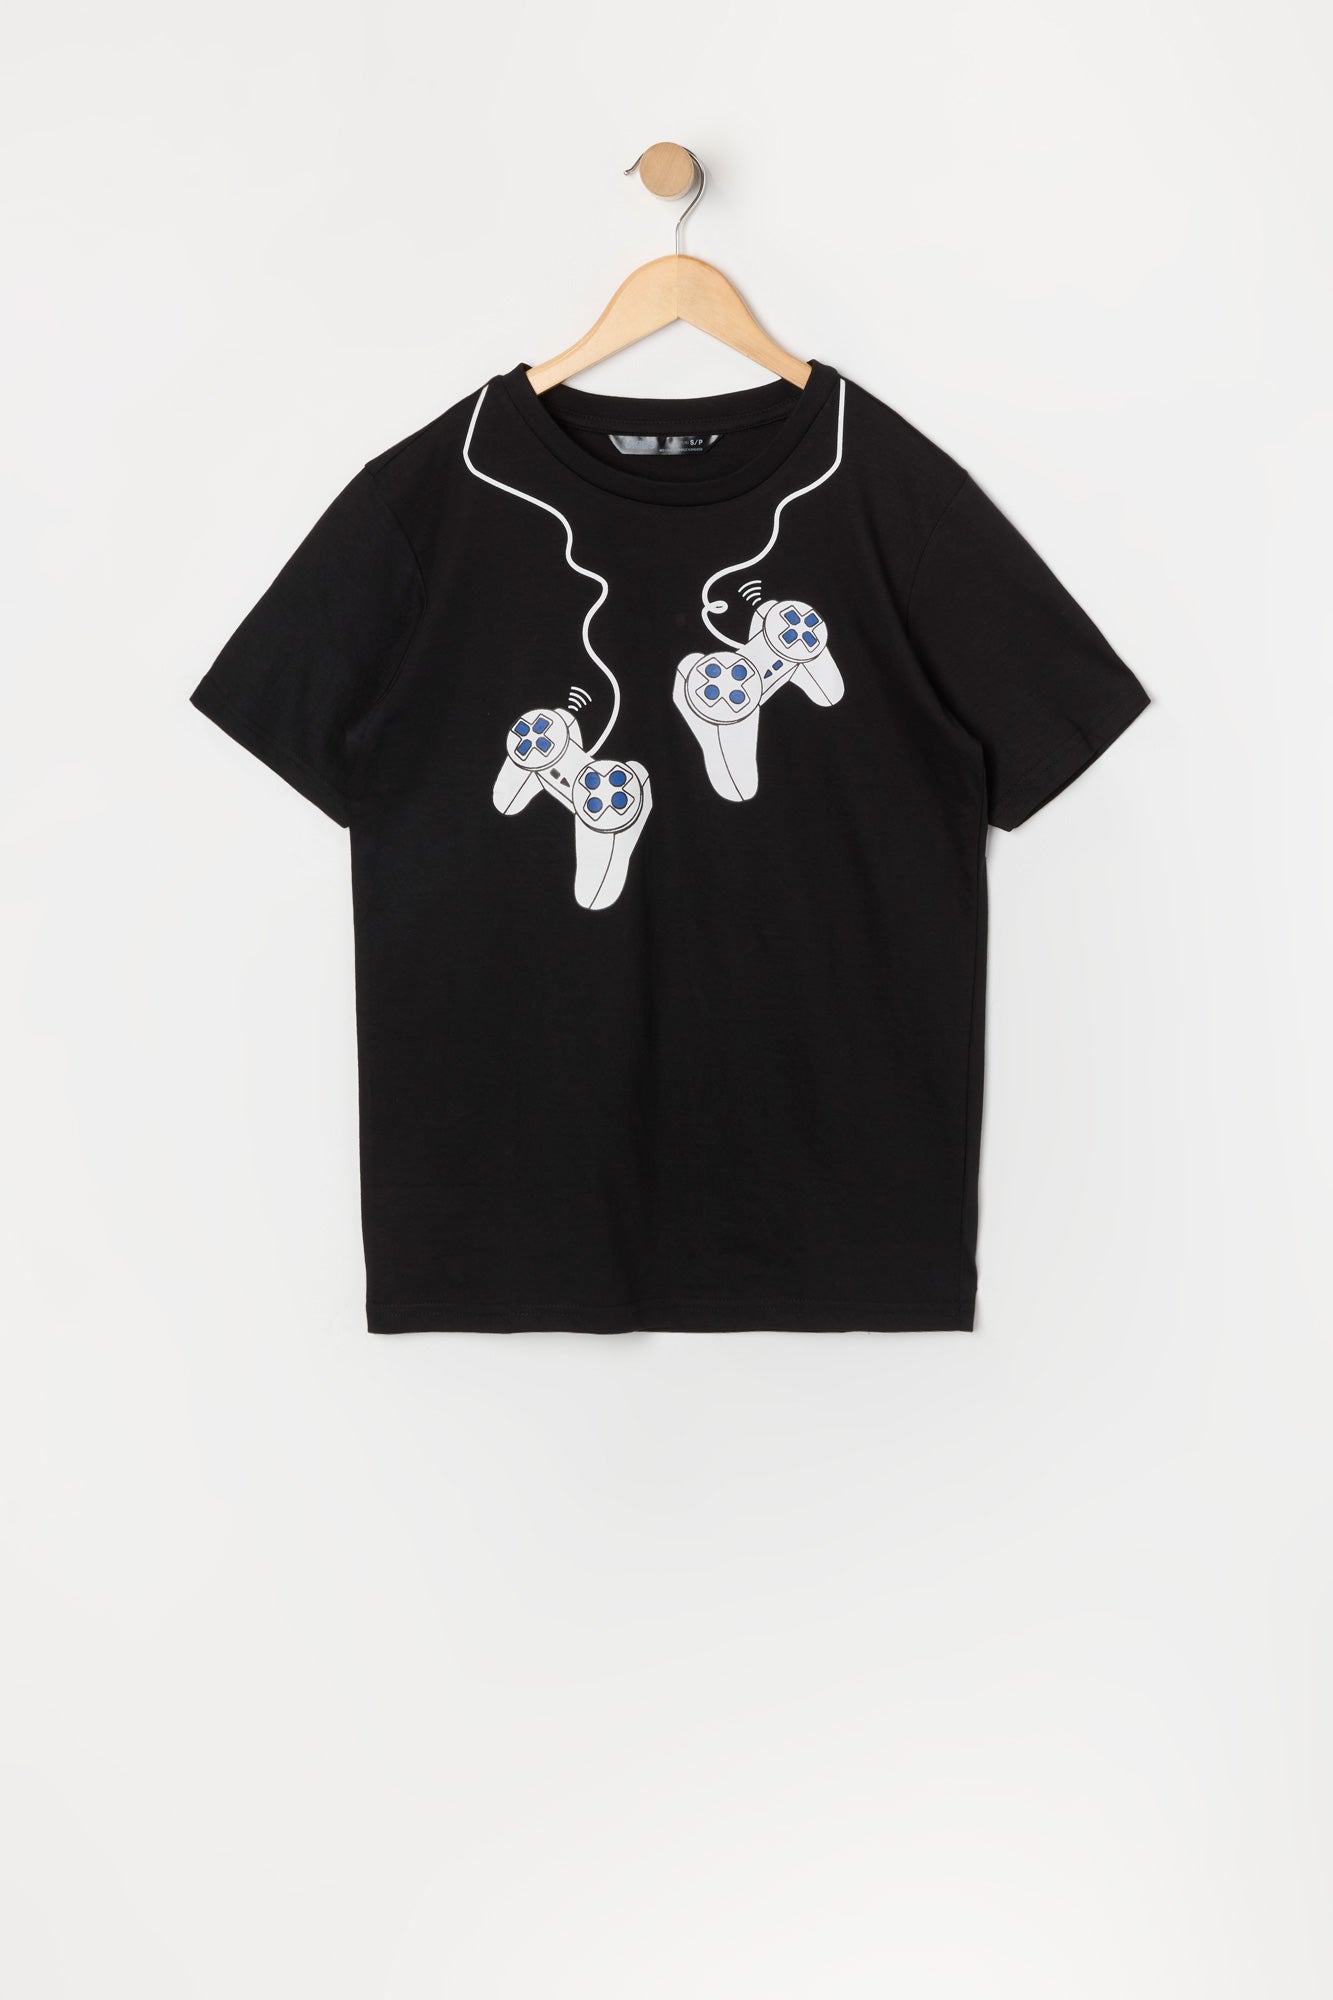 Boys Controllers Graphic T-Shirt